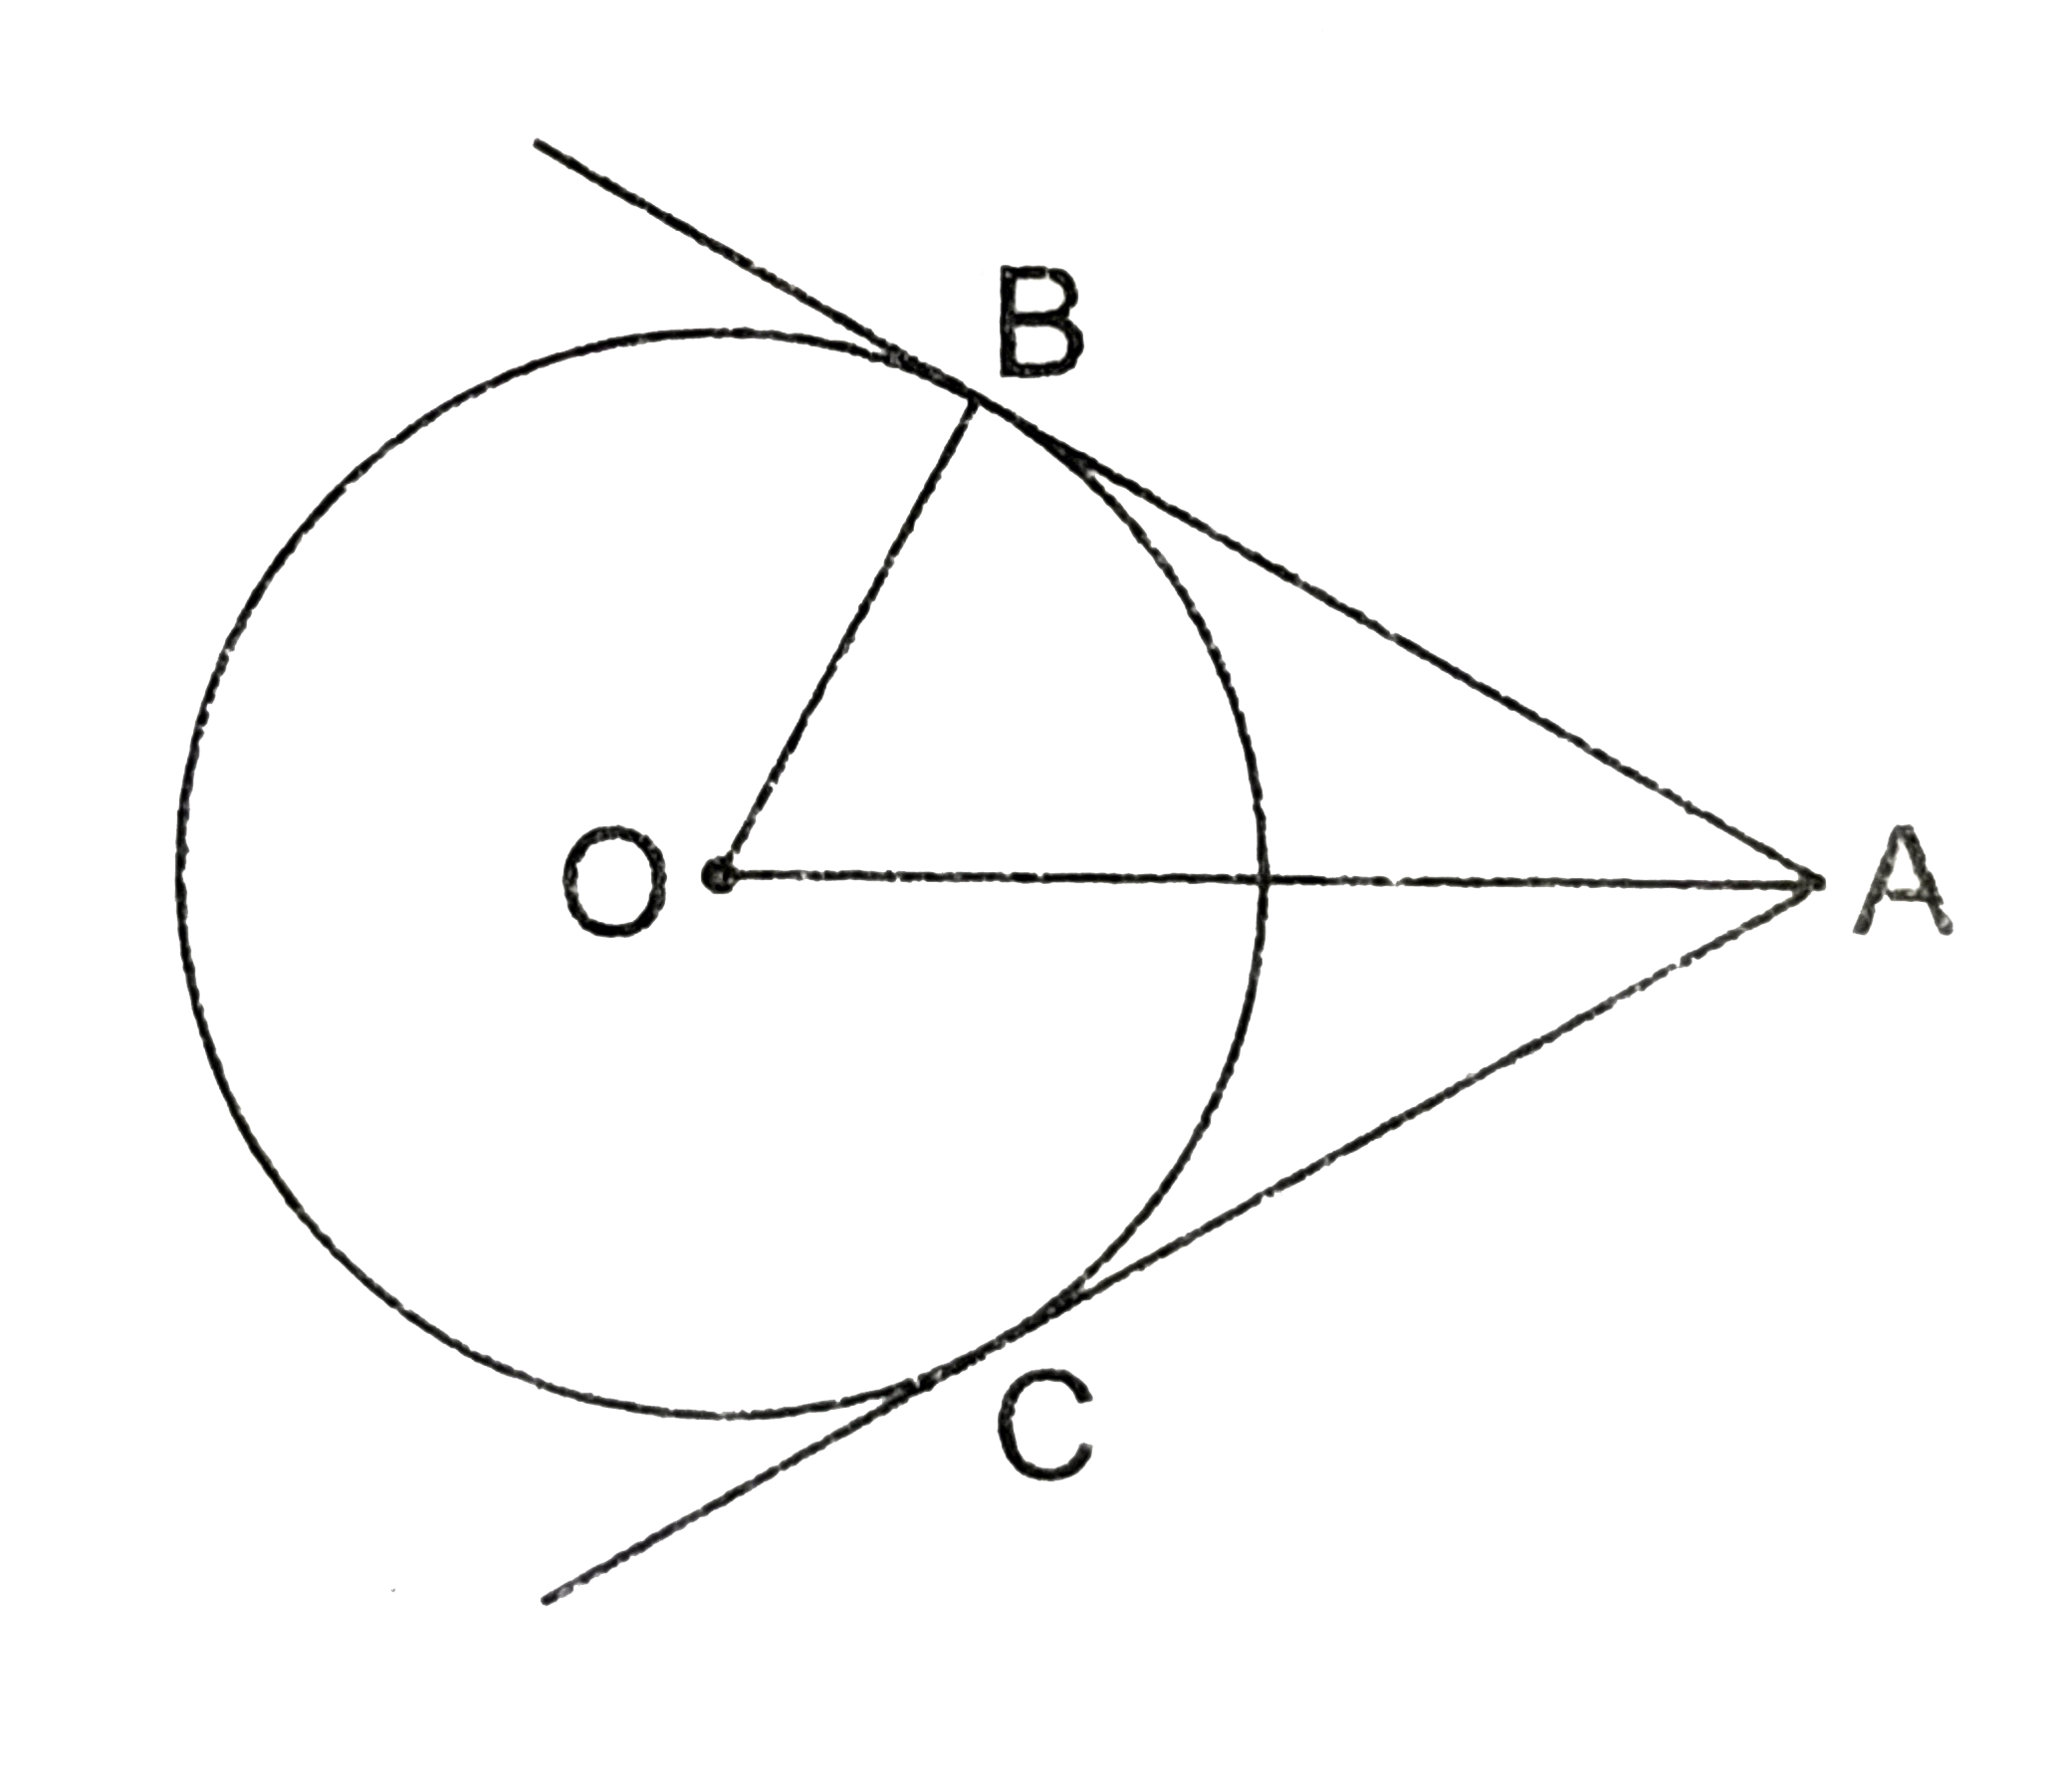 In the given figure, AB and AC are tangents to a circle with centre O and radius 8cm. If OA=17cm, then the length of AC (in cm) is